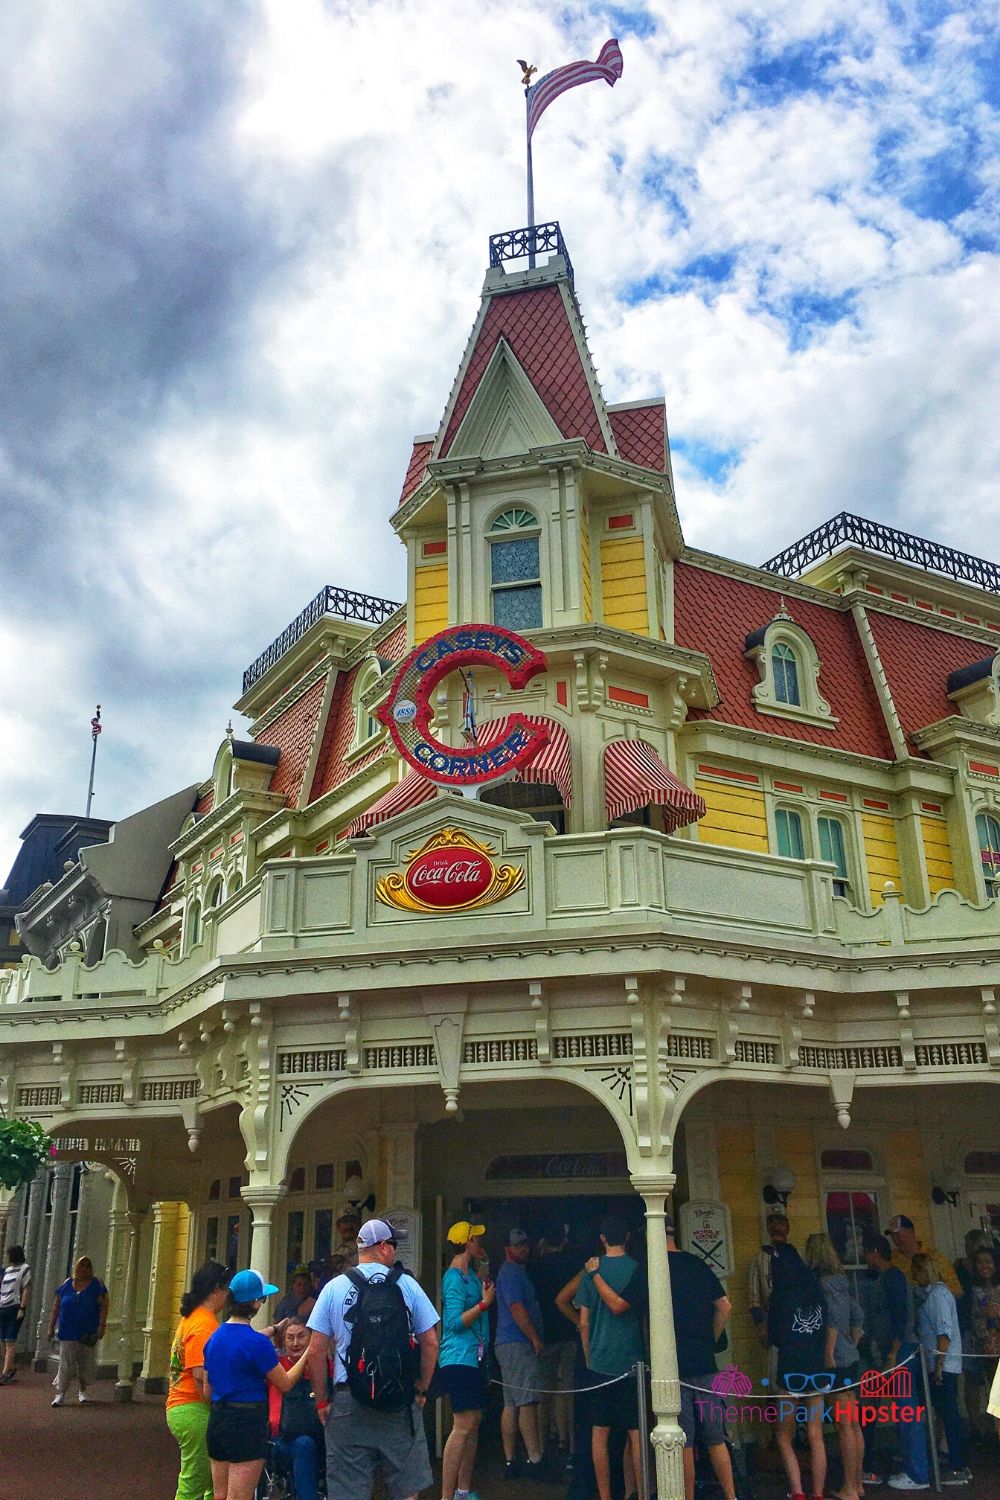 8 BEST Restaurants in the Magic Kingdom YOU CAN'T MISS! - ThemeParkHipster